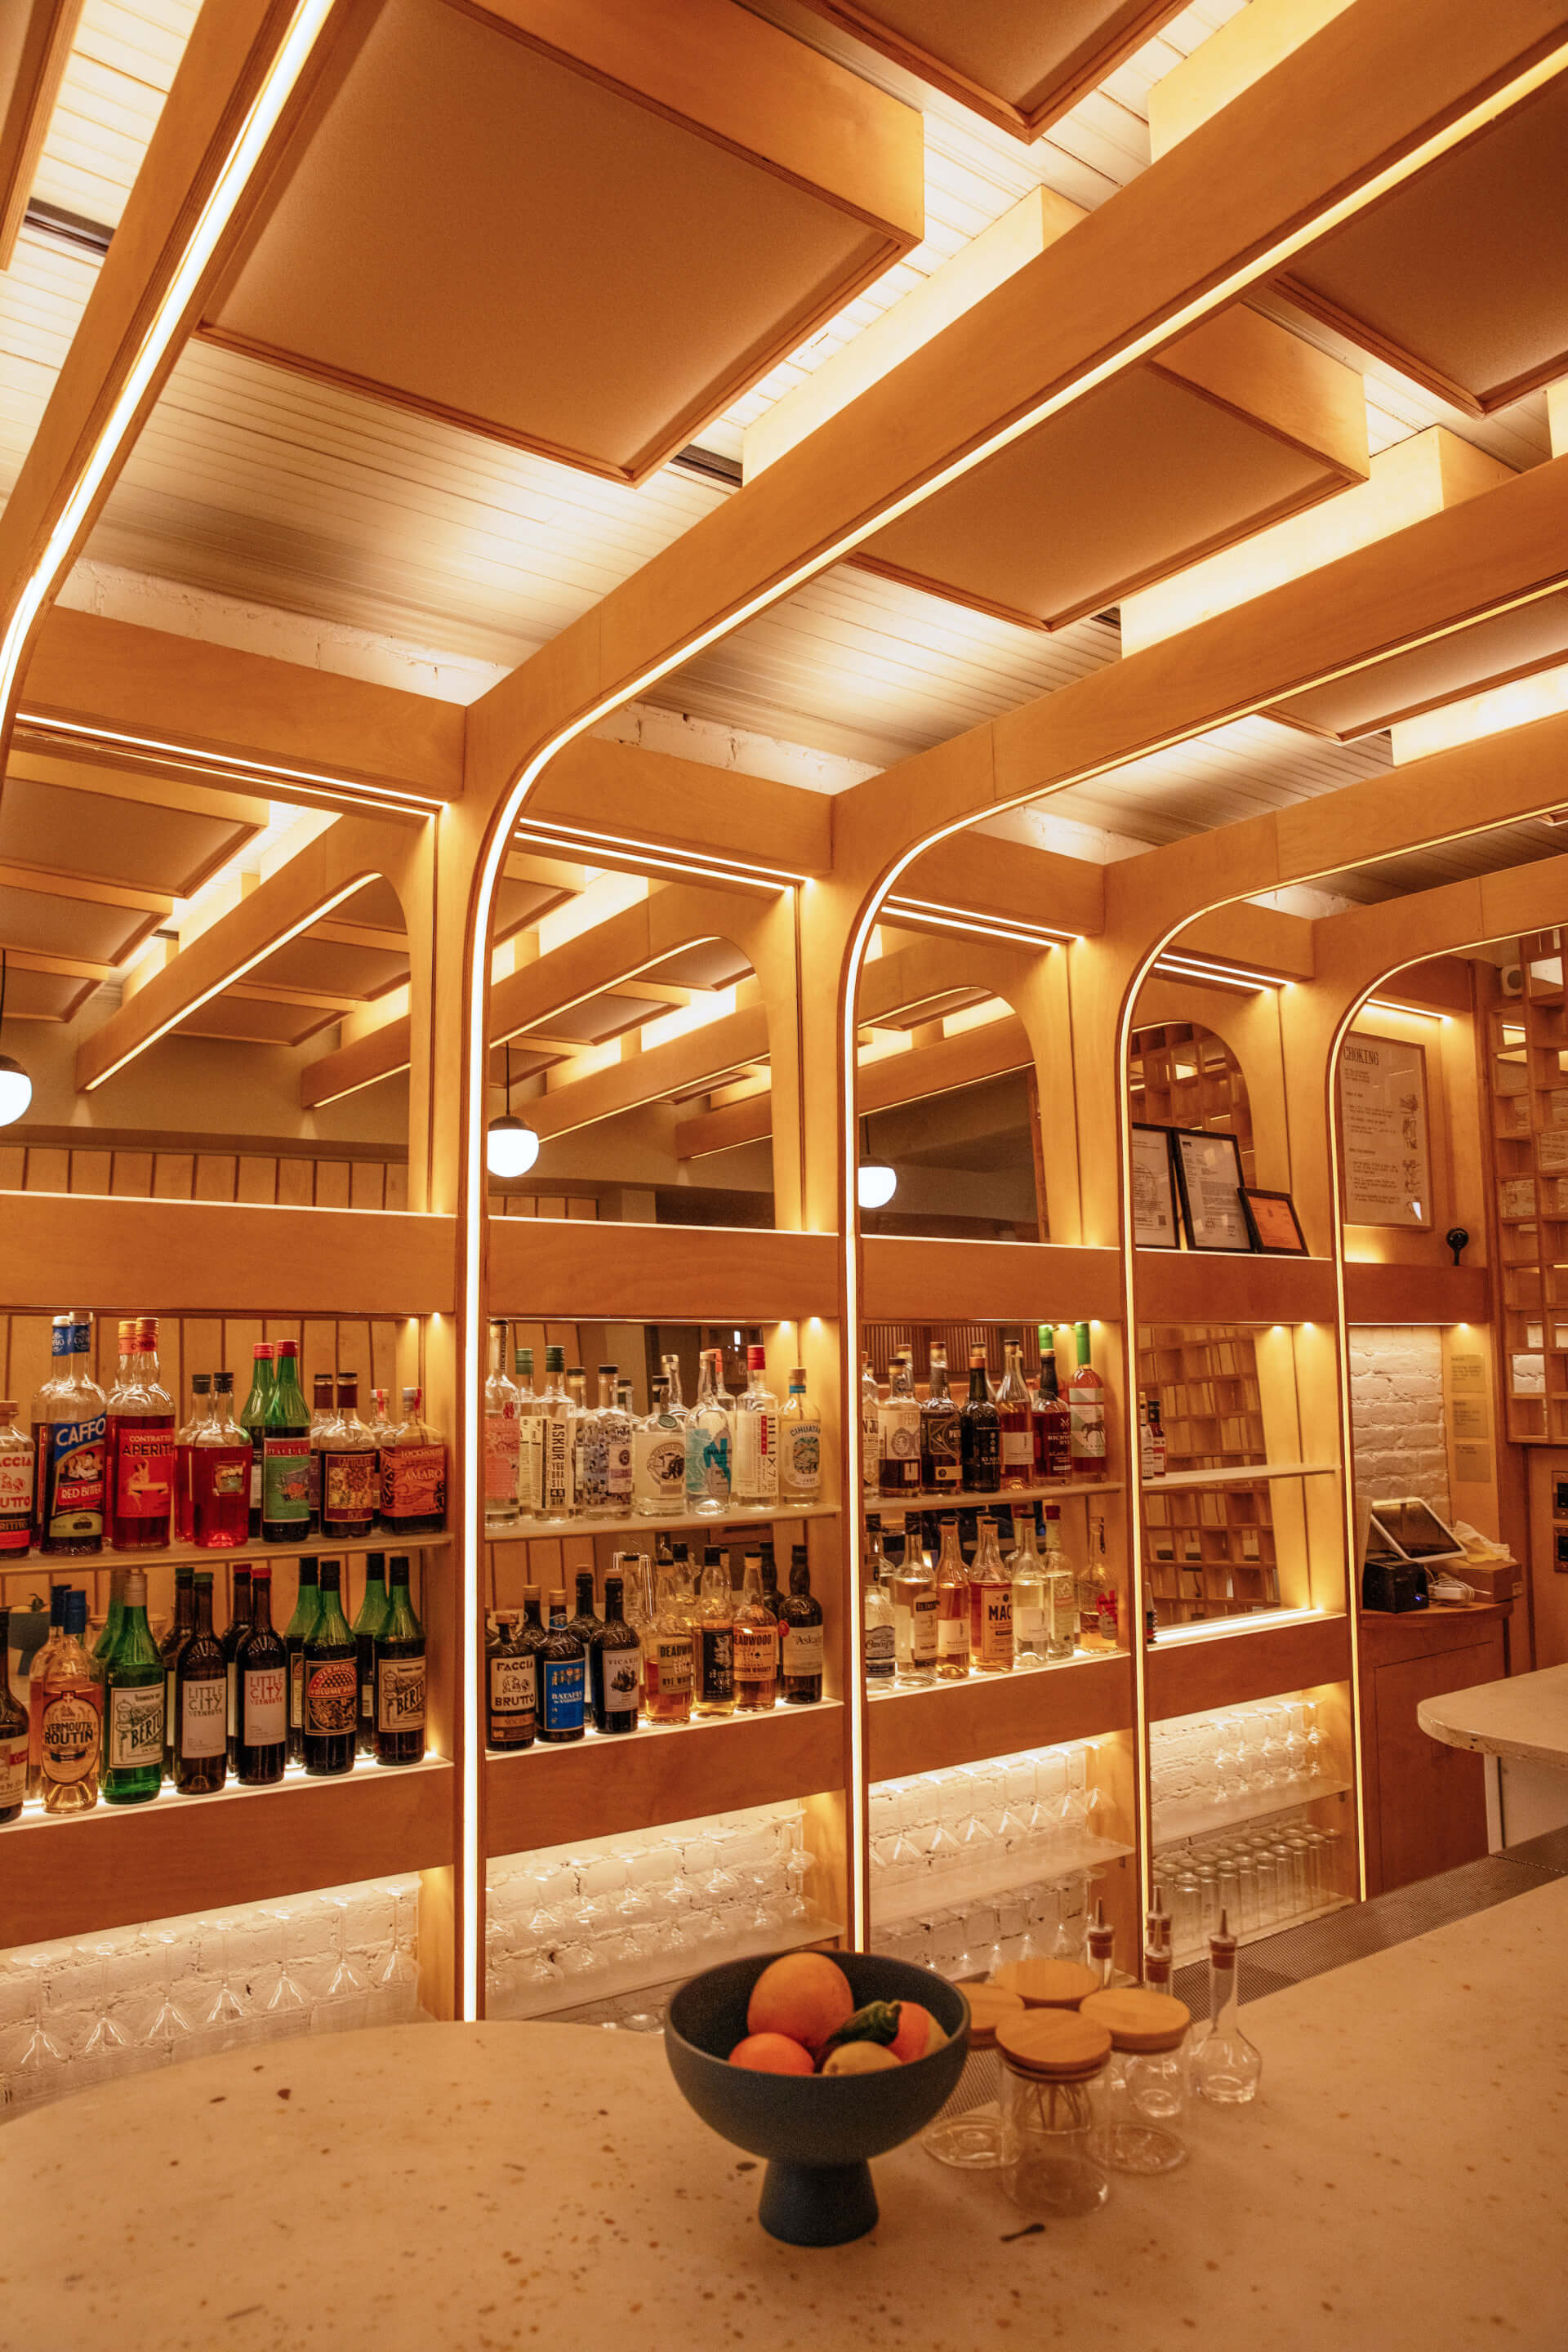 custom bar comprises a grid of reflective mirrors and wooden ribs embedded with LEDs.